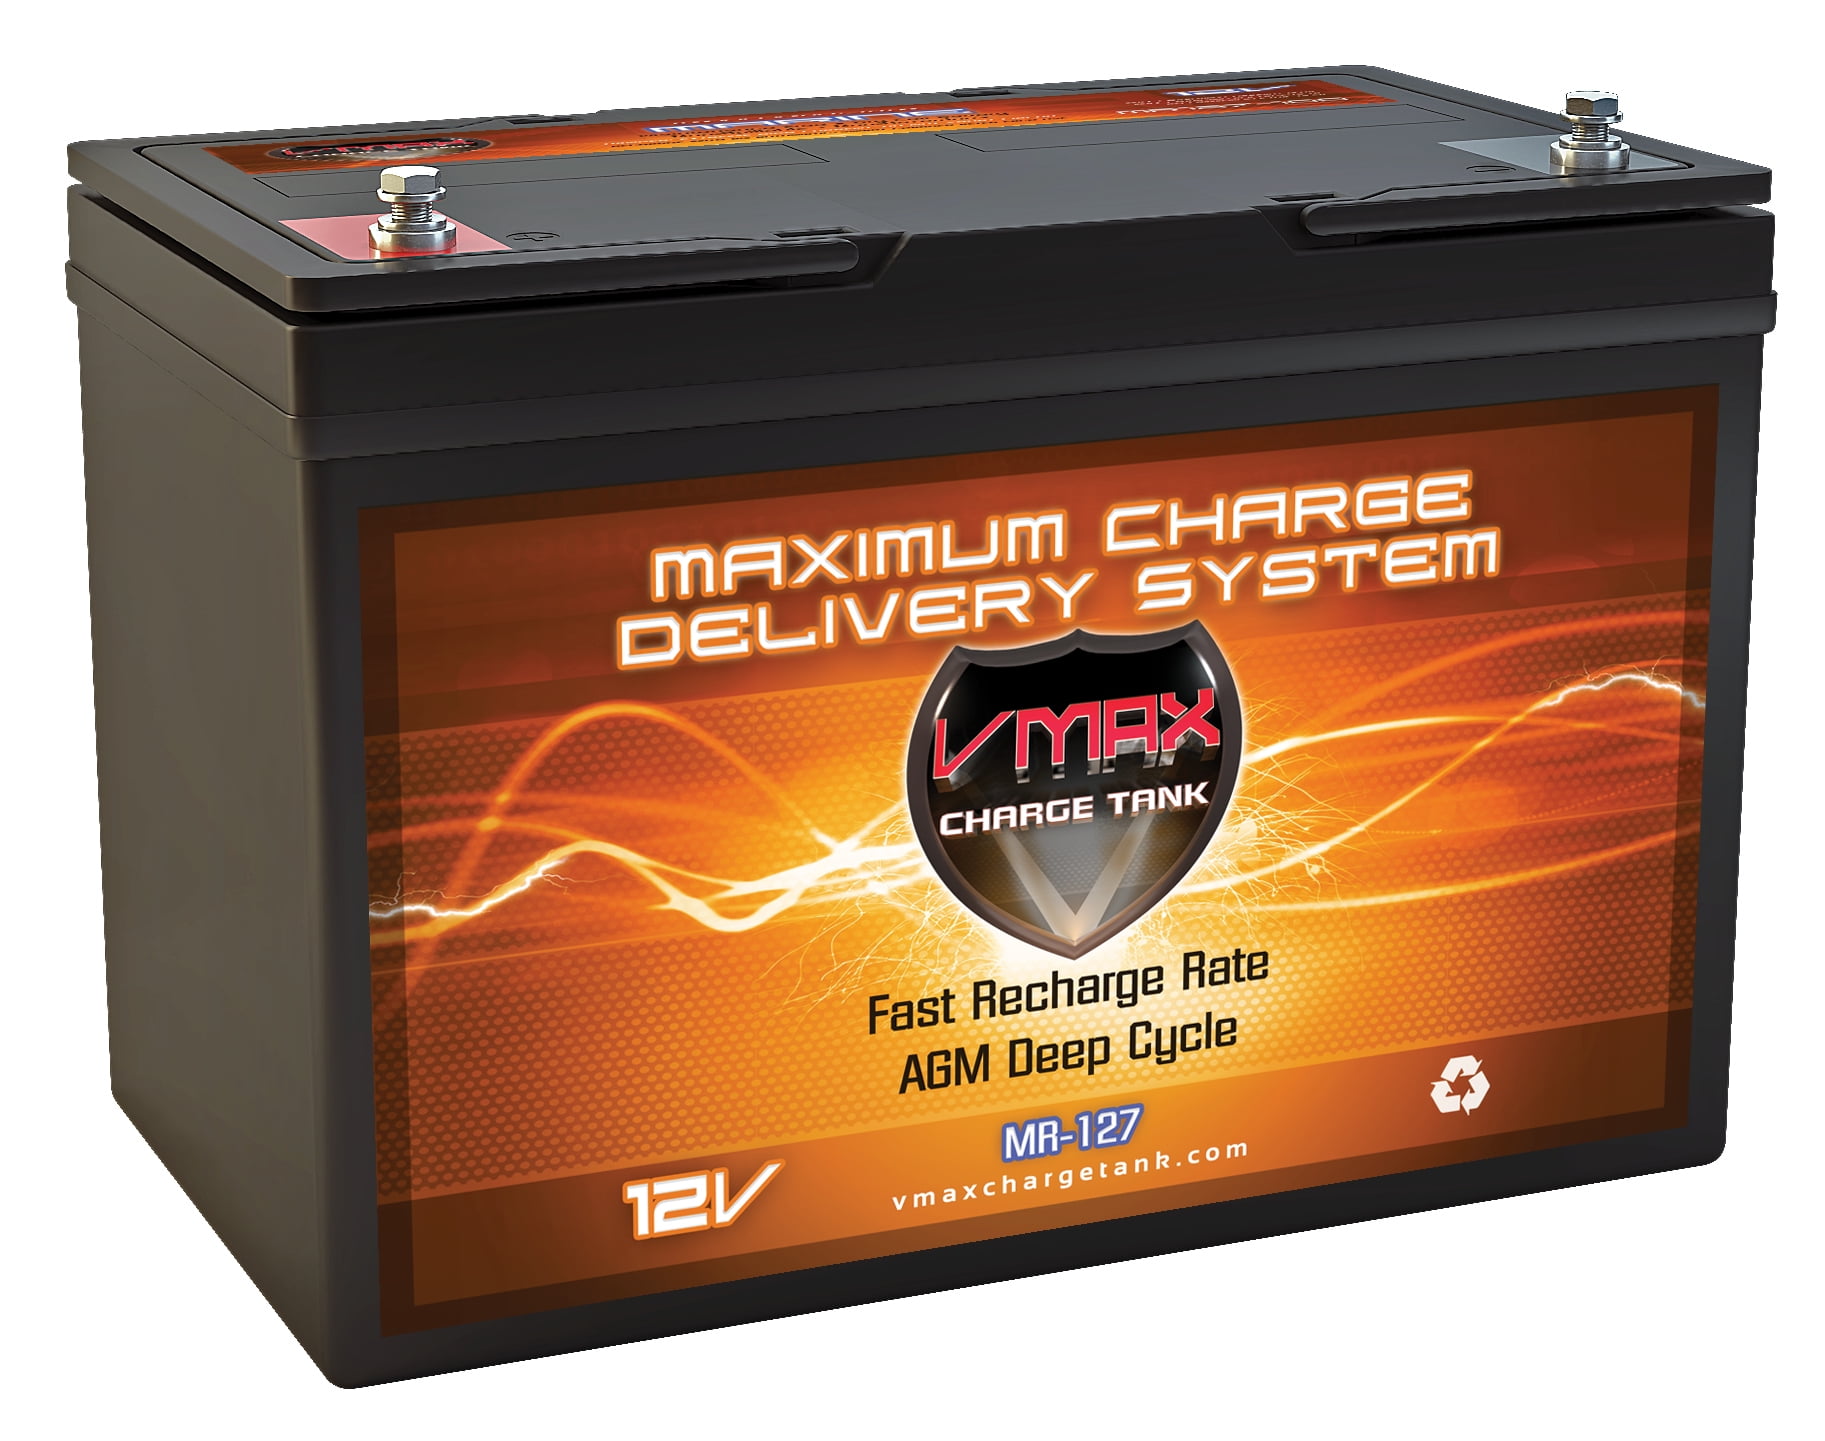 VMAX857 35AH AGM U1 Battery for Watersnake Trolling Motor with 30lb Thrust 